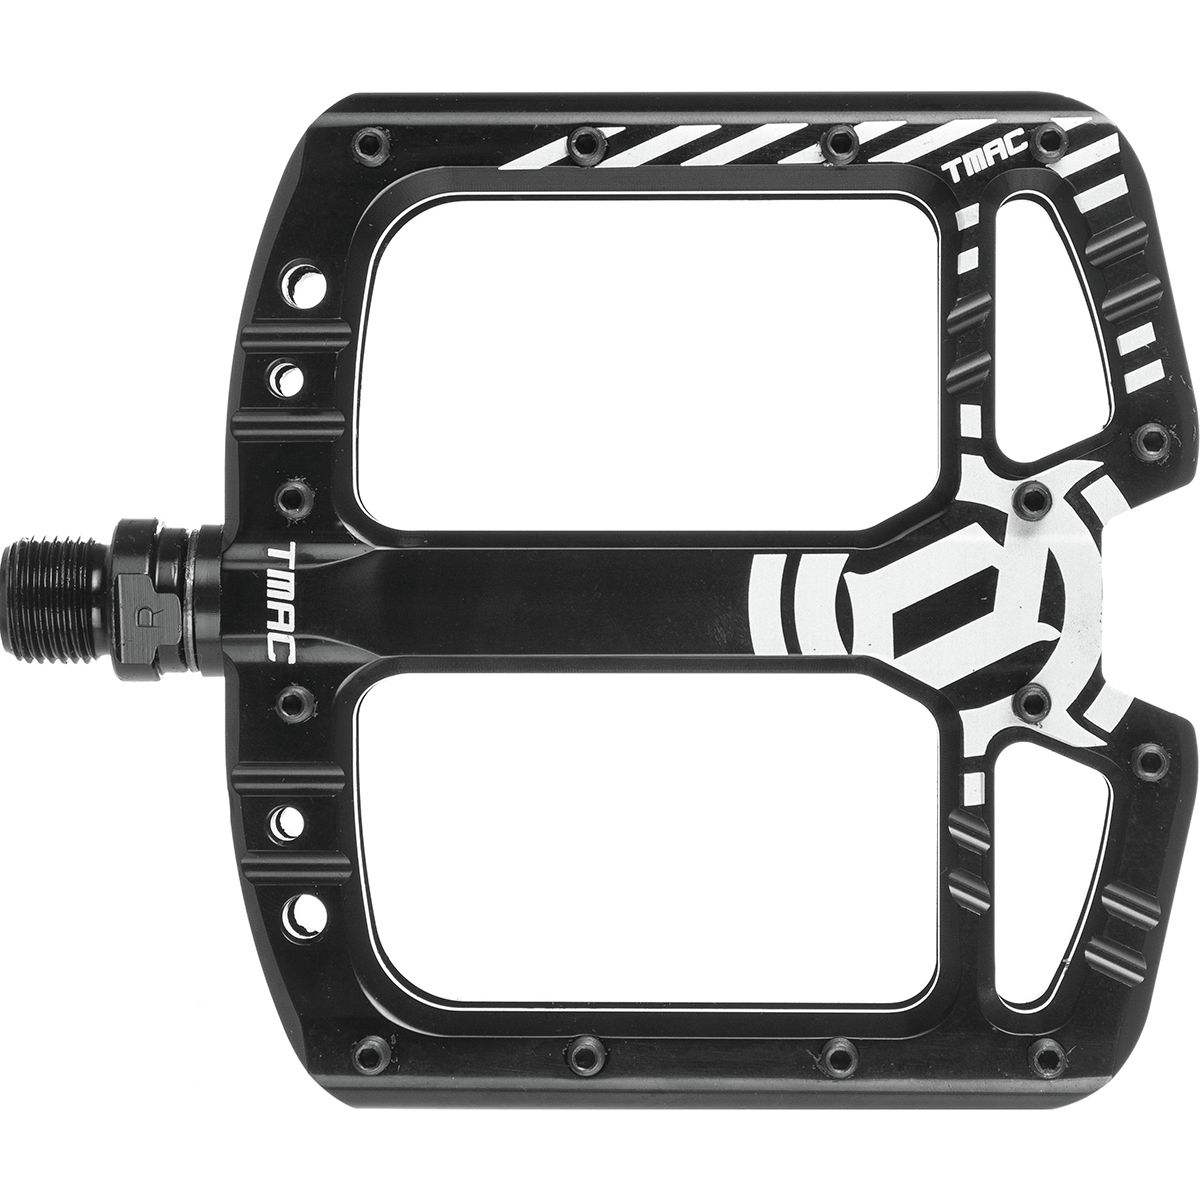 Deity Components TMAC Pedals